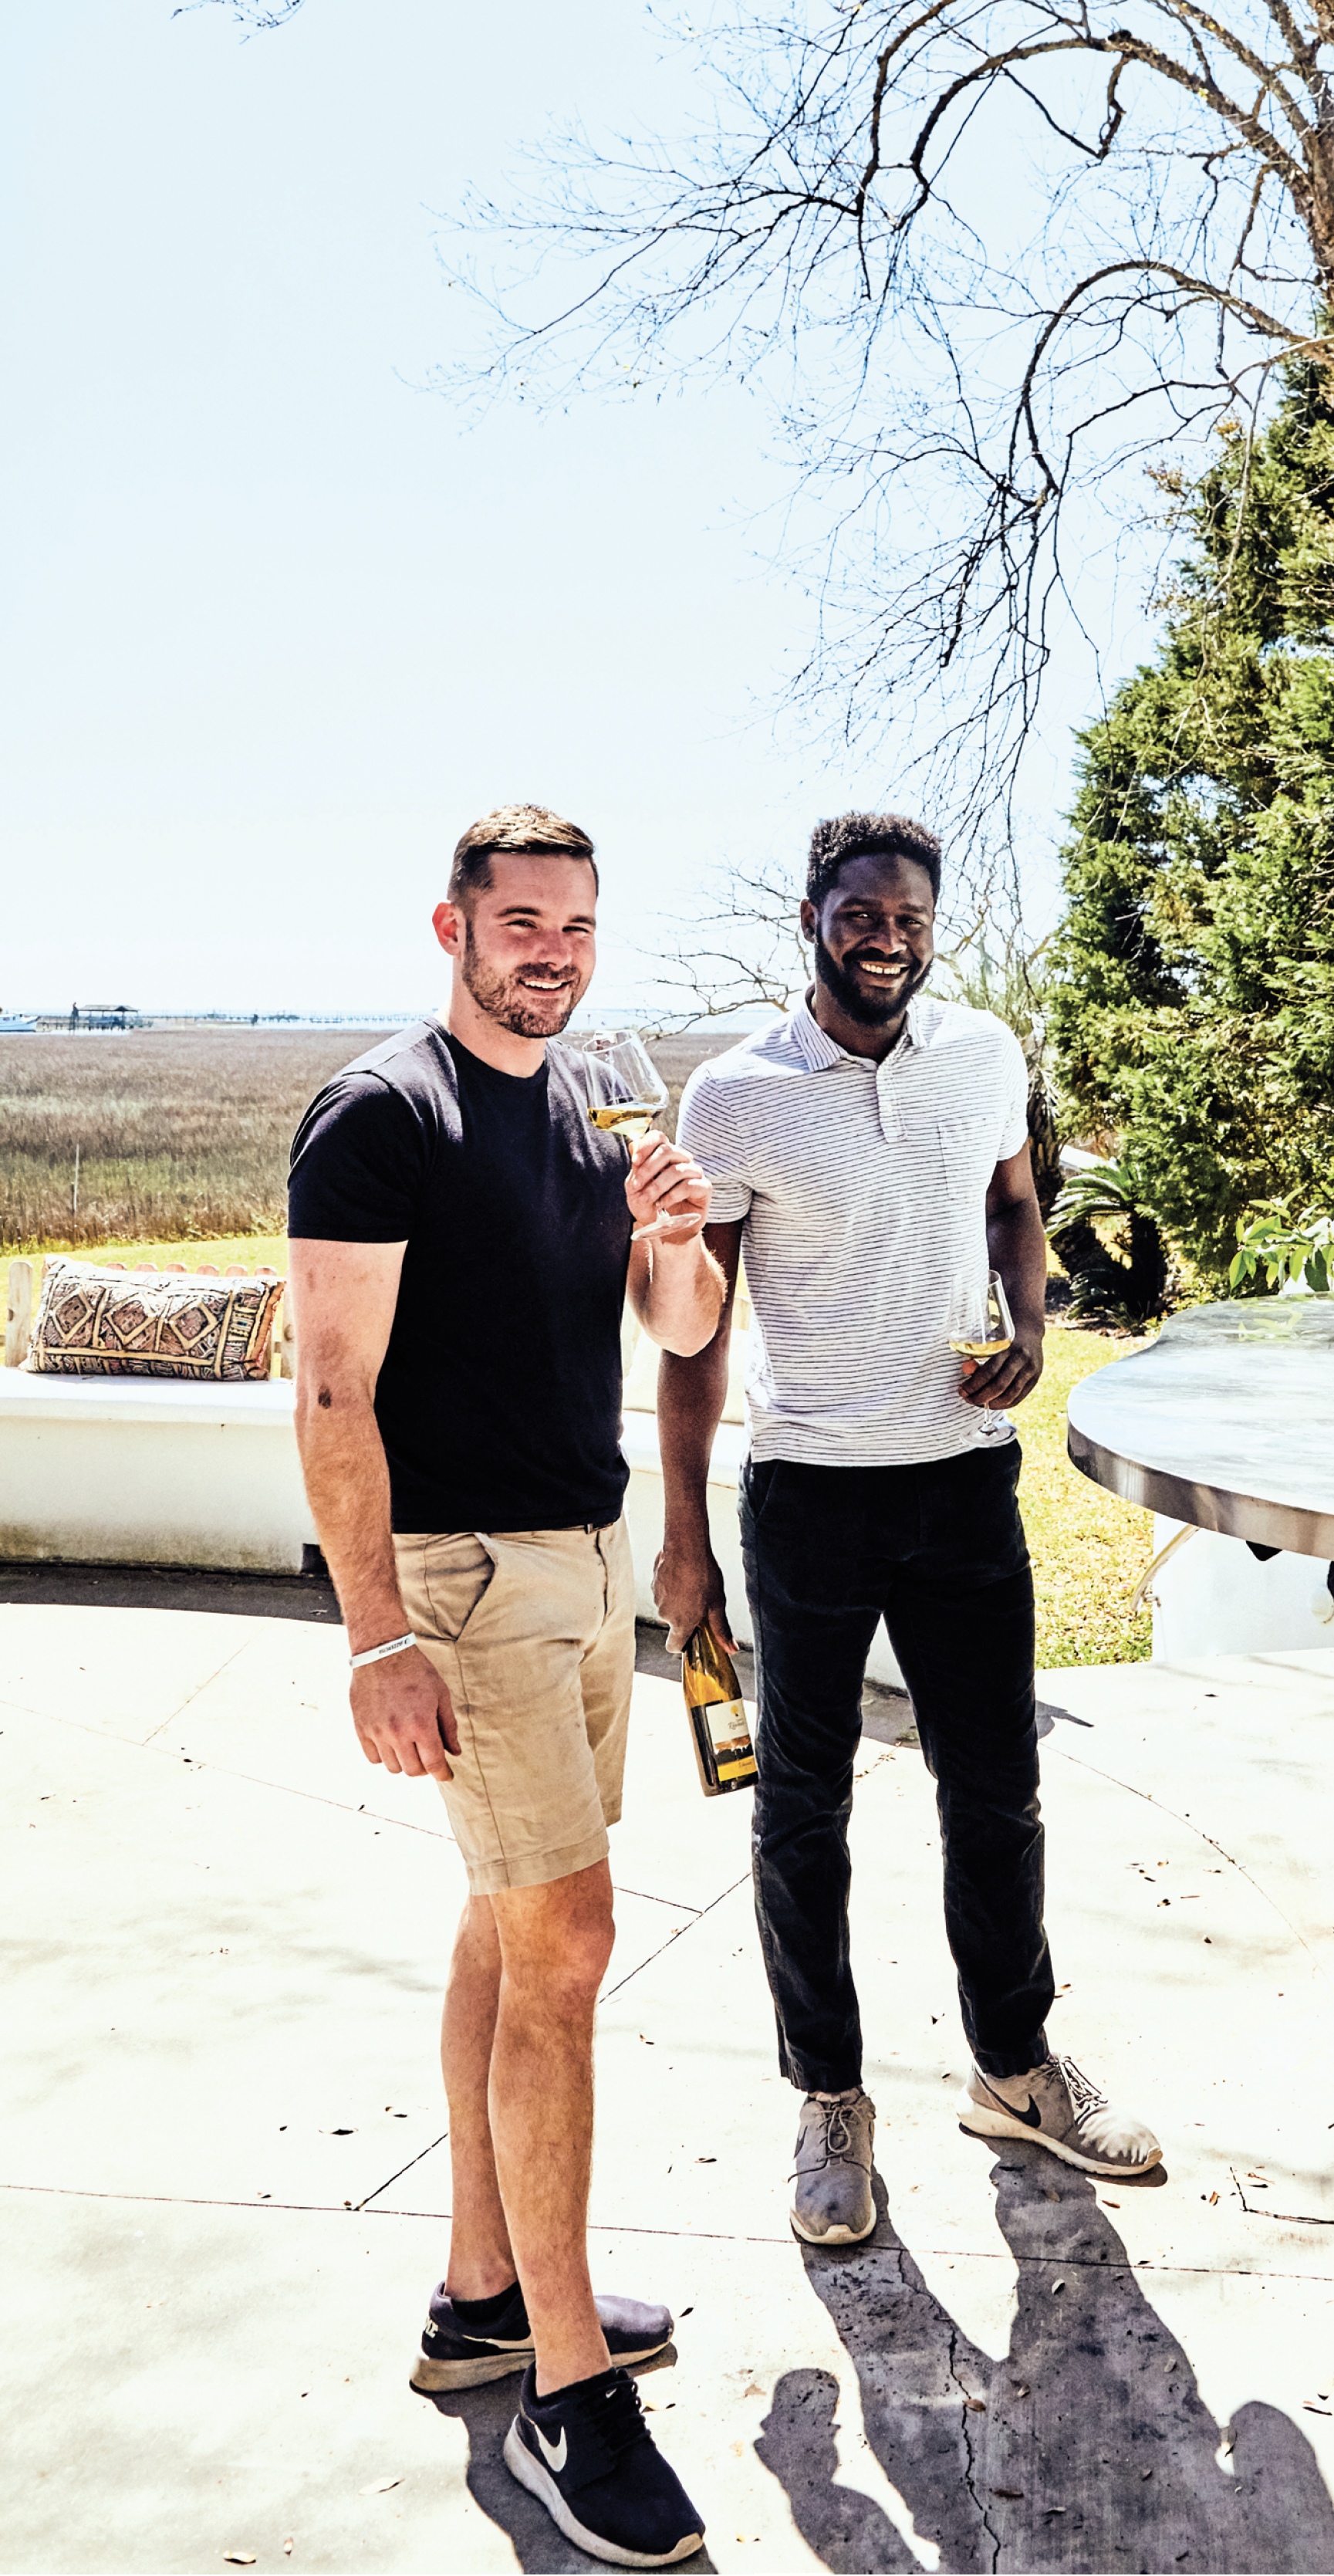 Miles and Femi first became friends while working at the Charleston Grill, under sommelier Rick Rubel’s tutelage.